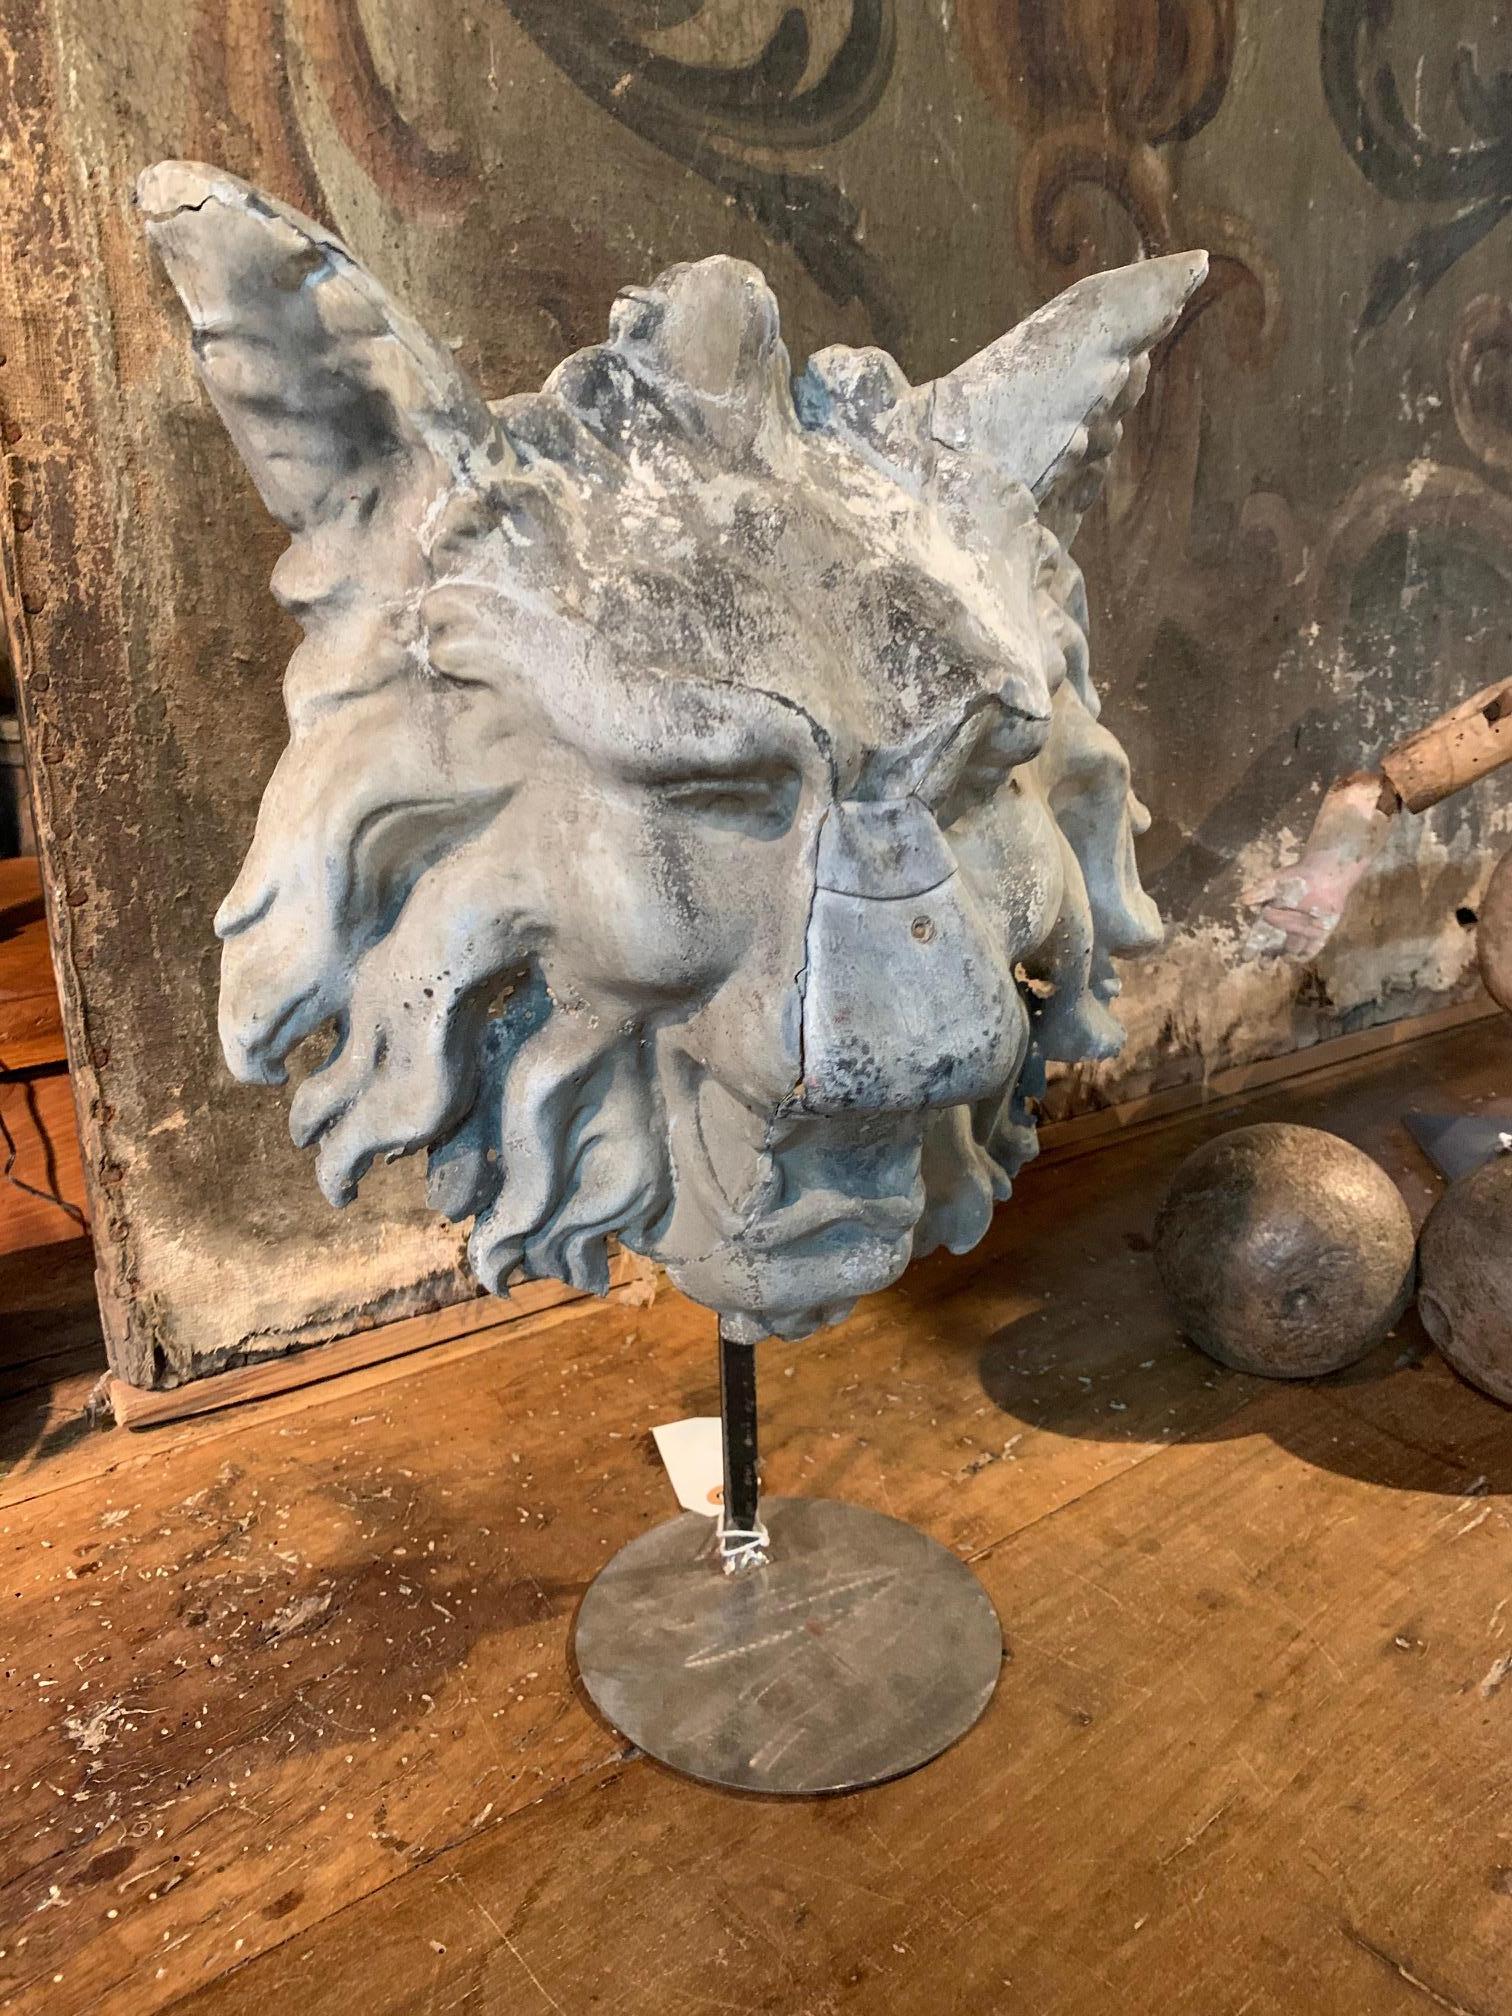 A terrific mask in zinc of the head of a mythical lion-wolf presented on its metal stand, early 18th century from France. A fabulous accent piece for any living area.